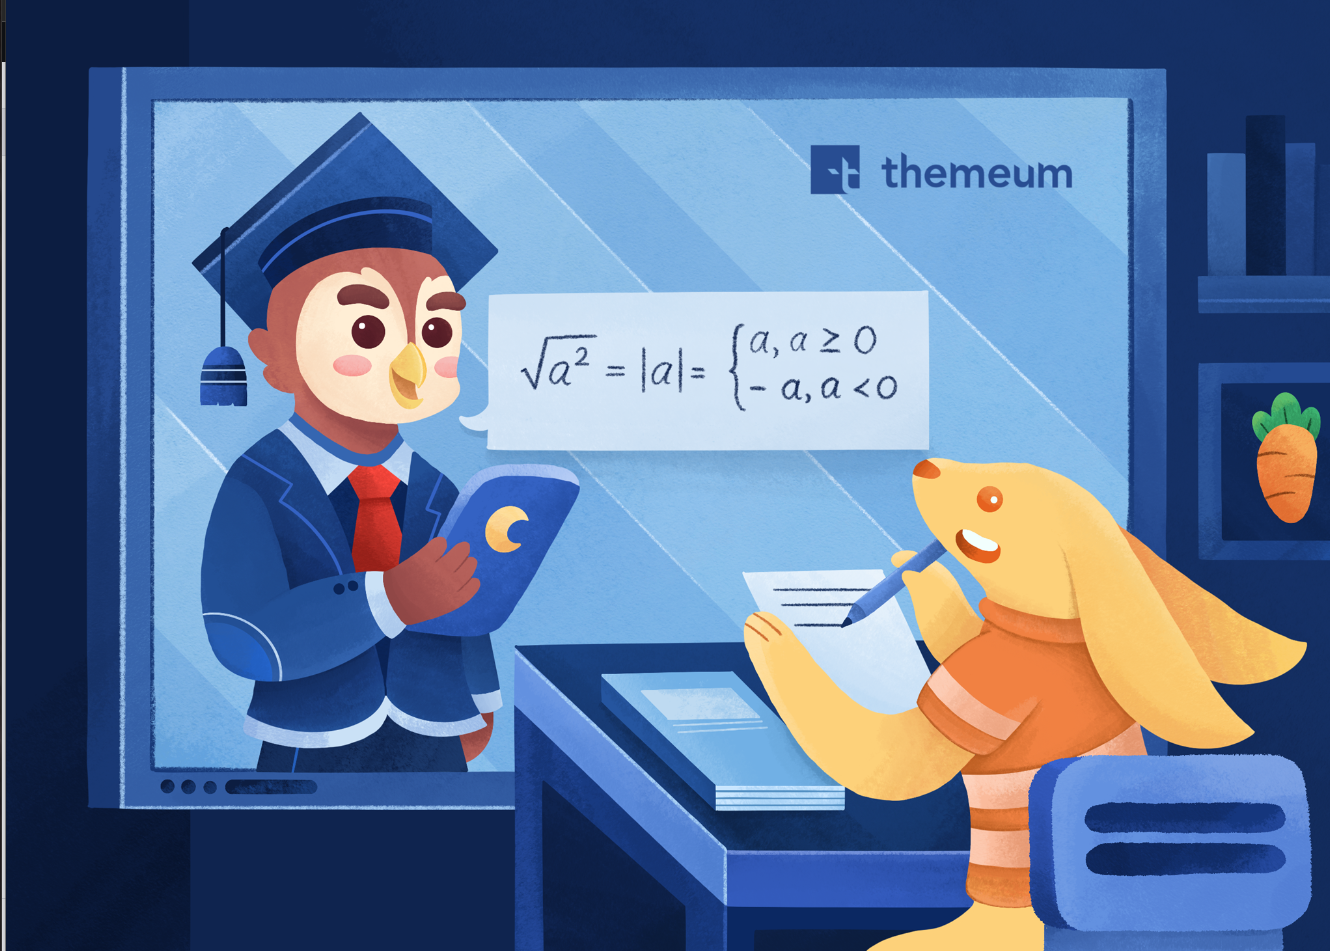 bunny.net partners with Tutor LMS to simplify online course delivery at realistic price points!